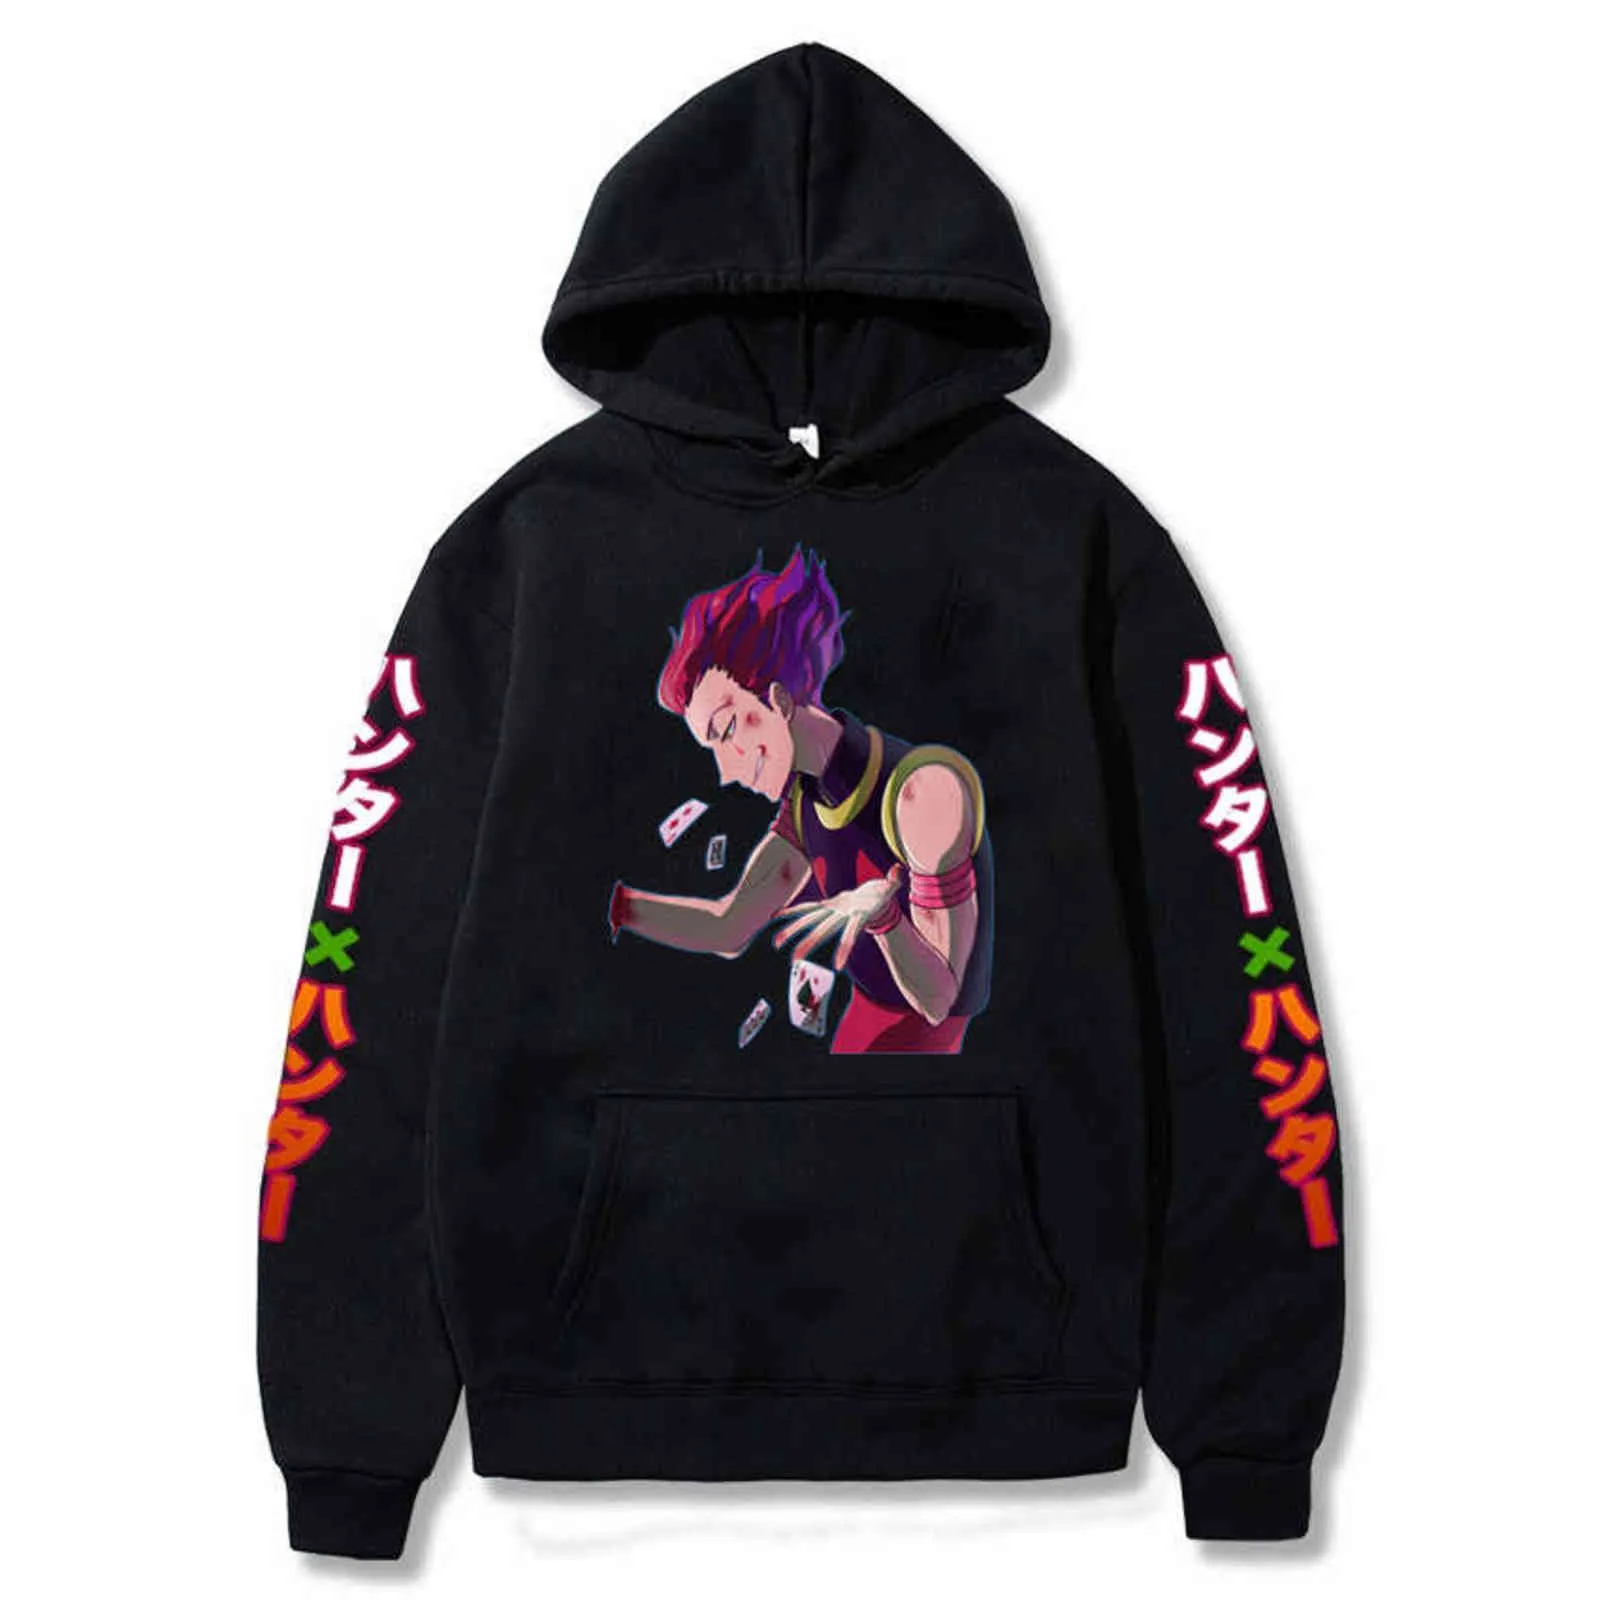 2021 Hot Anime Hisoka Morow Hoodie Graphique Hunter X Hunter Cosplay Sweat pour Hommes Femmes Tops Unisexe Pull Y211118